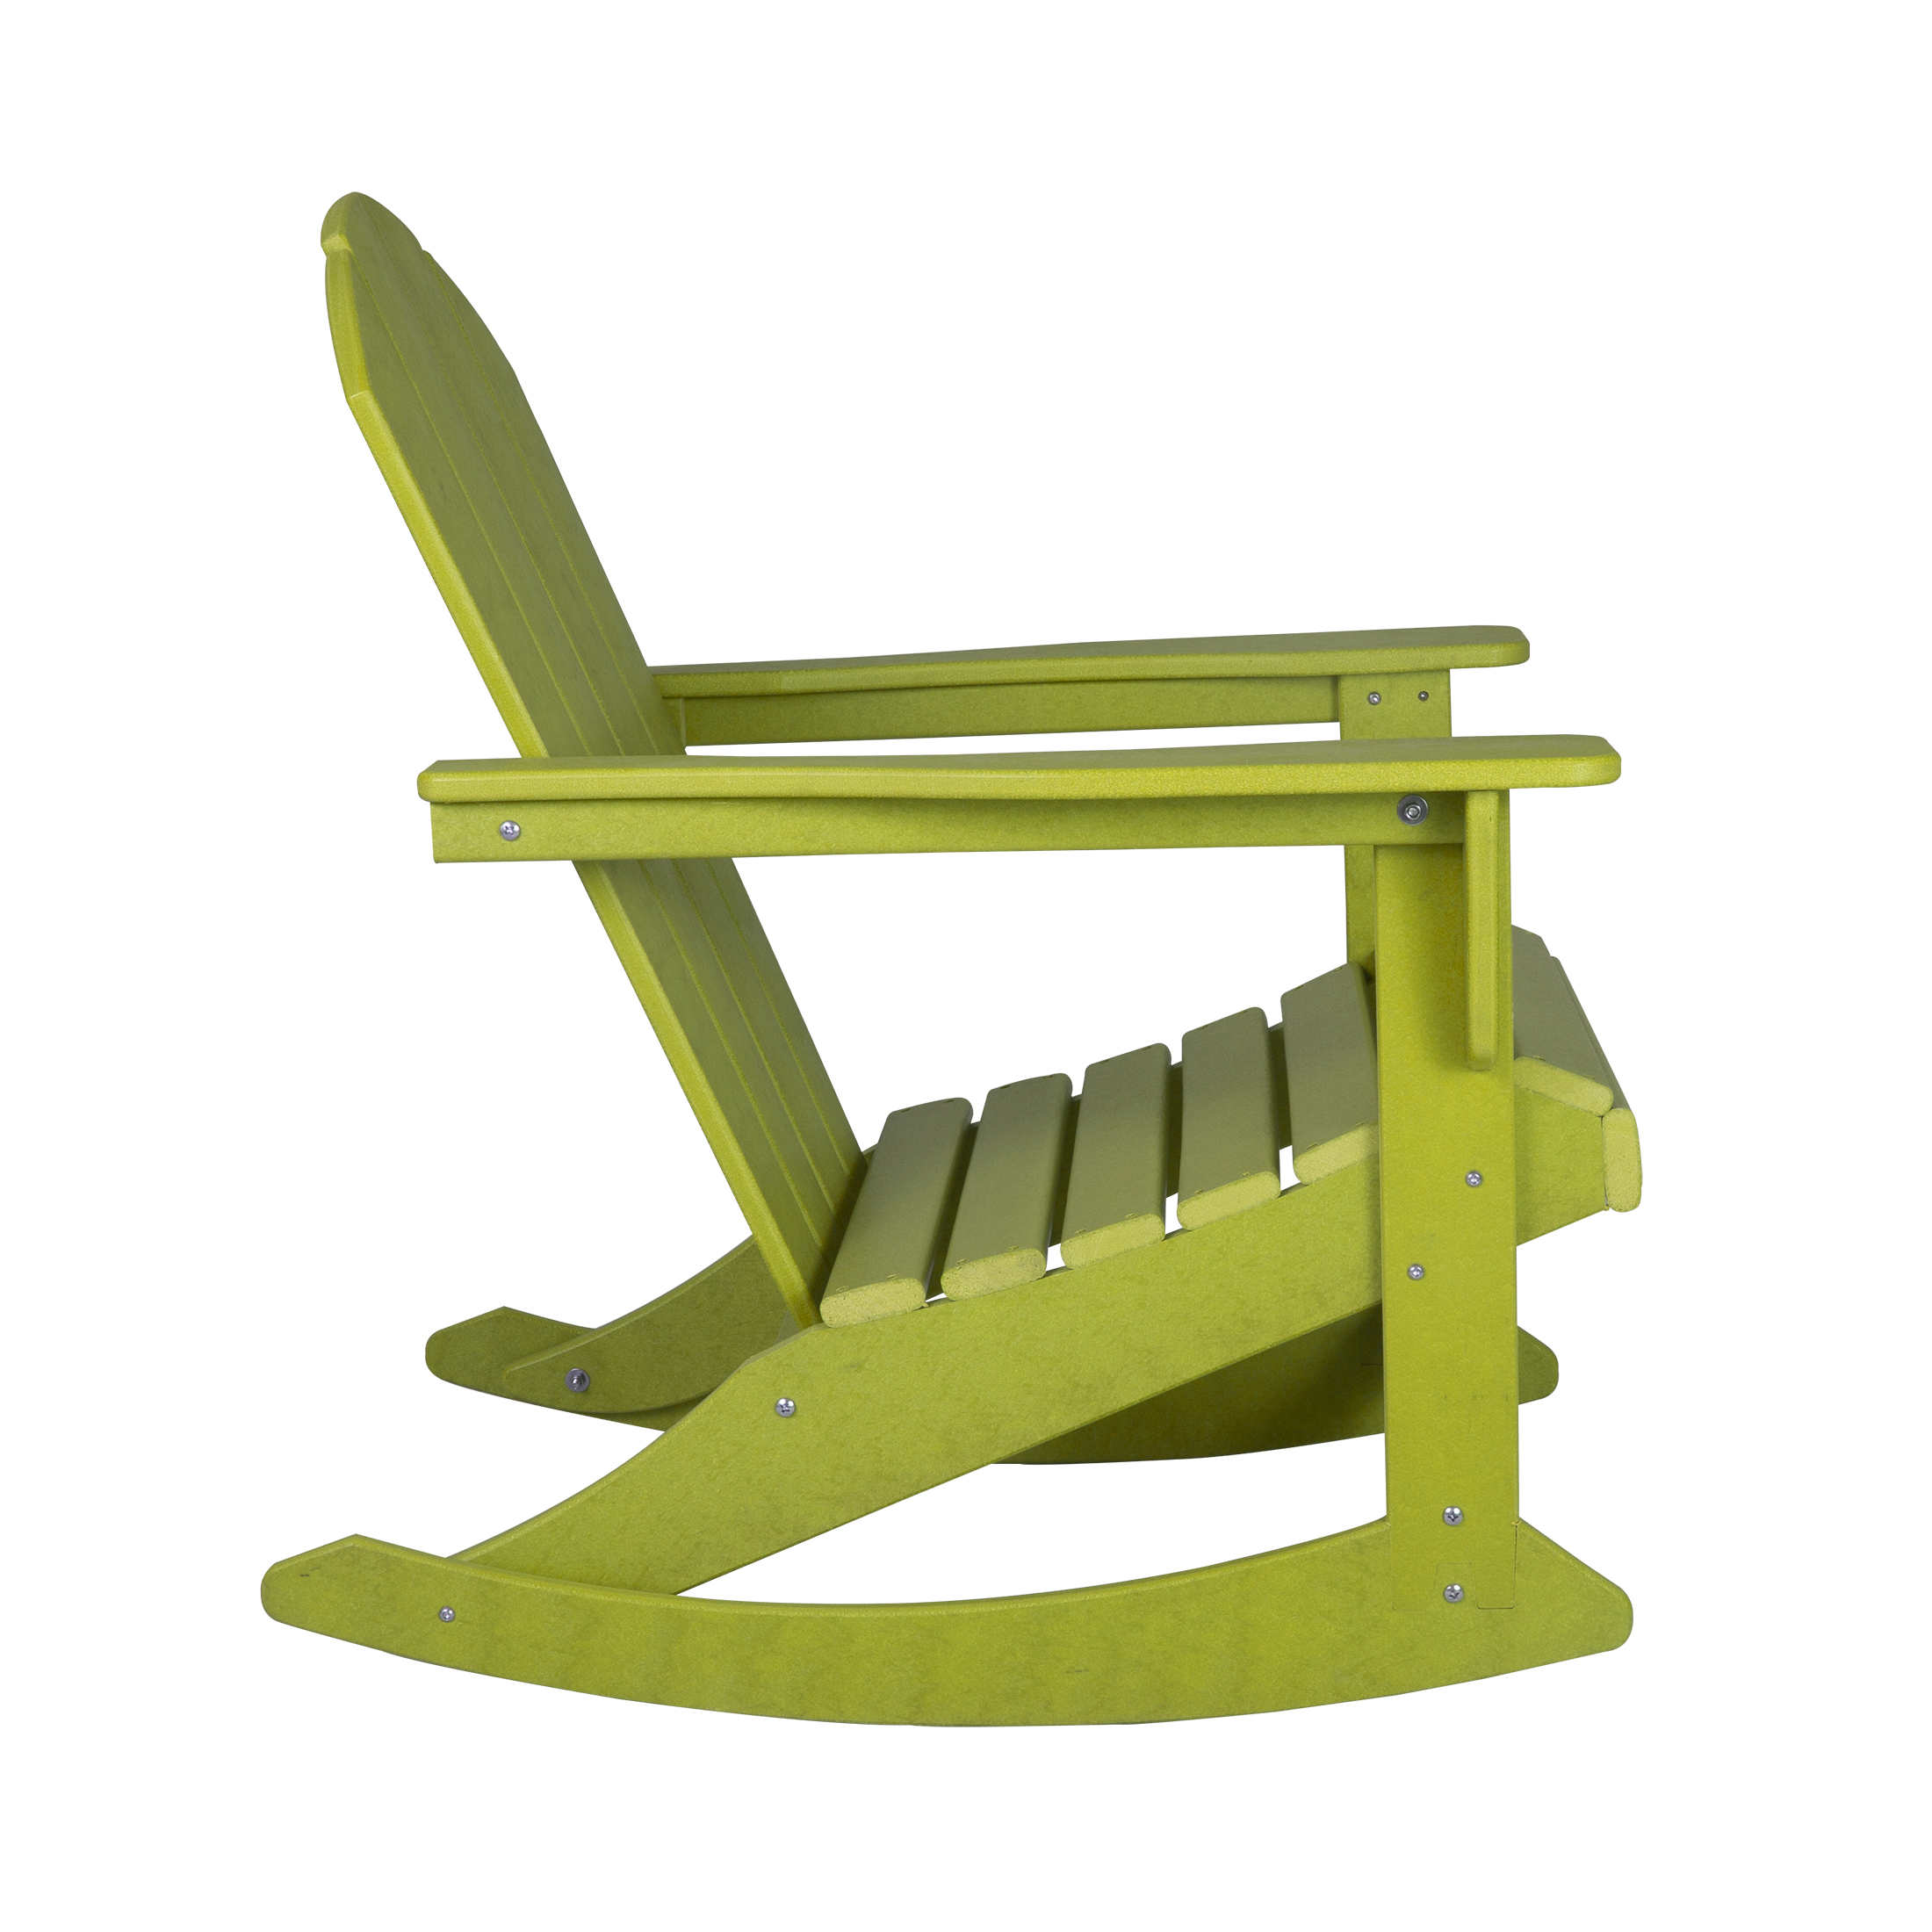 GARDEN Plastic Adirondack Rocking Chair for Outdoor Patio Porch Seating, Lime - image 5 of 7